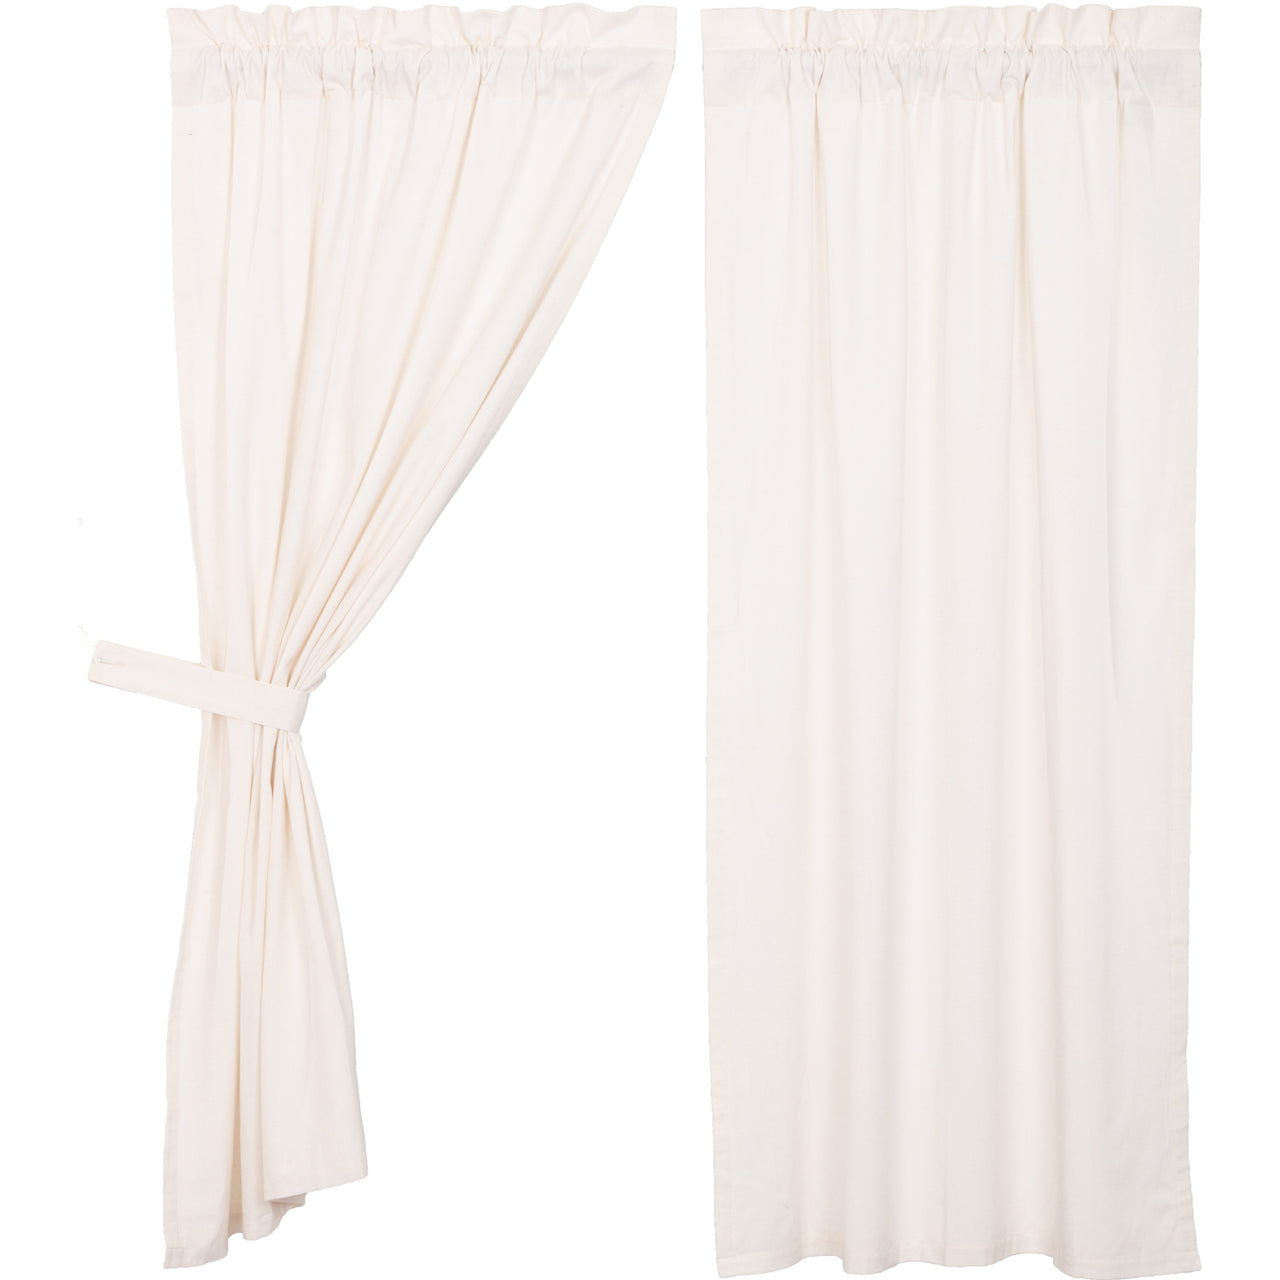 Simple Life Flax Antique White Short Panel Country Style Curtain Set of 2 63"x36"